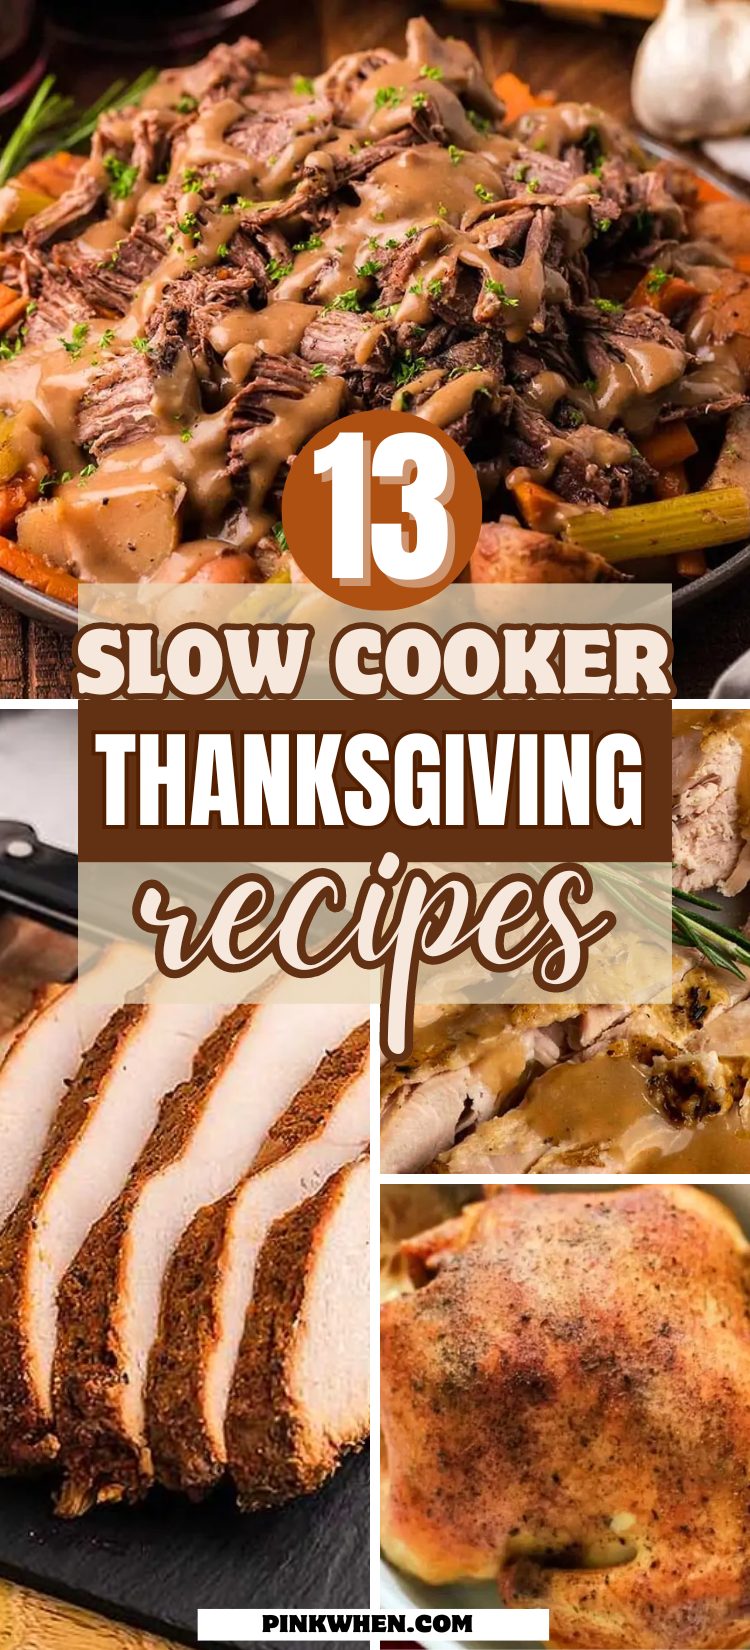 Slow Cooker Thanksgiving Recipes to Make in the Crockpt